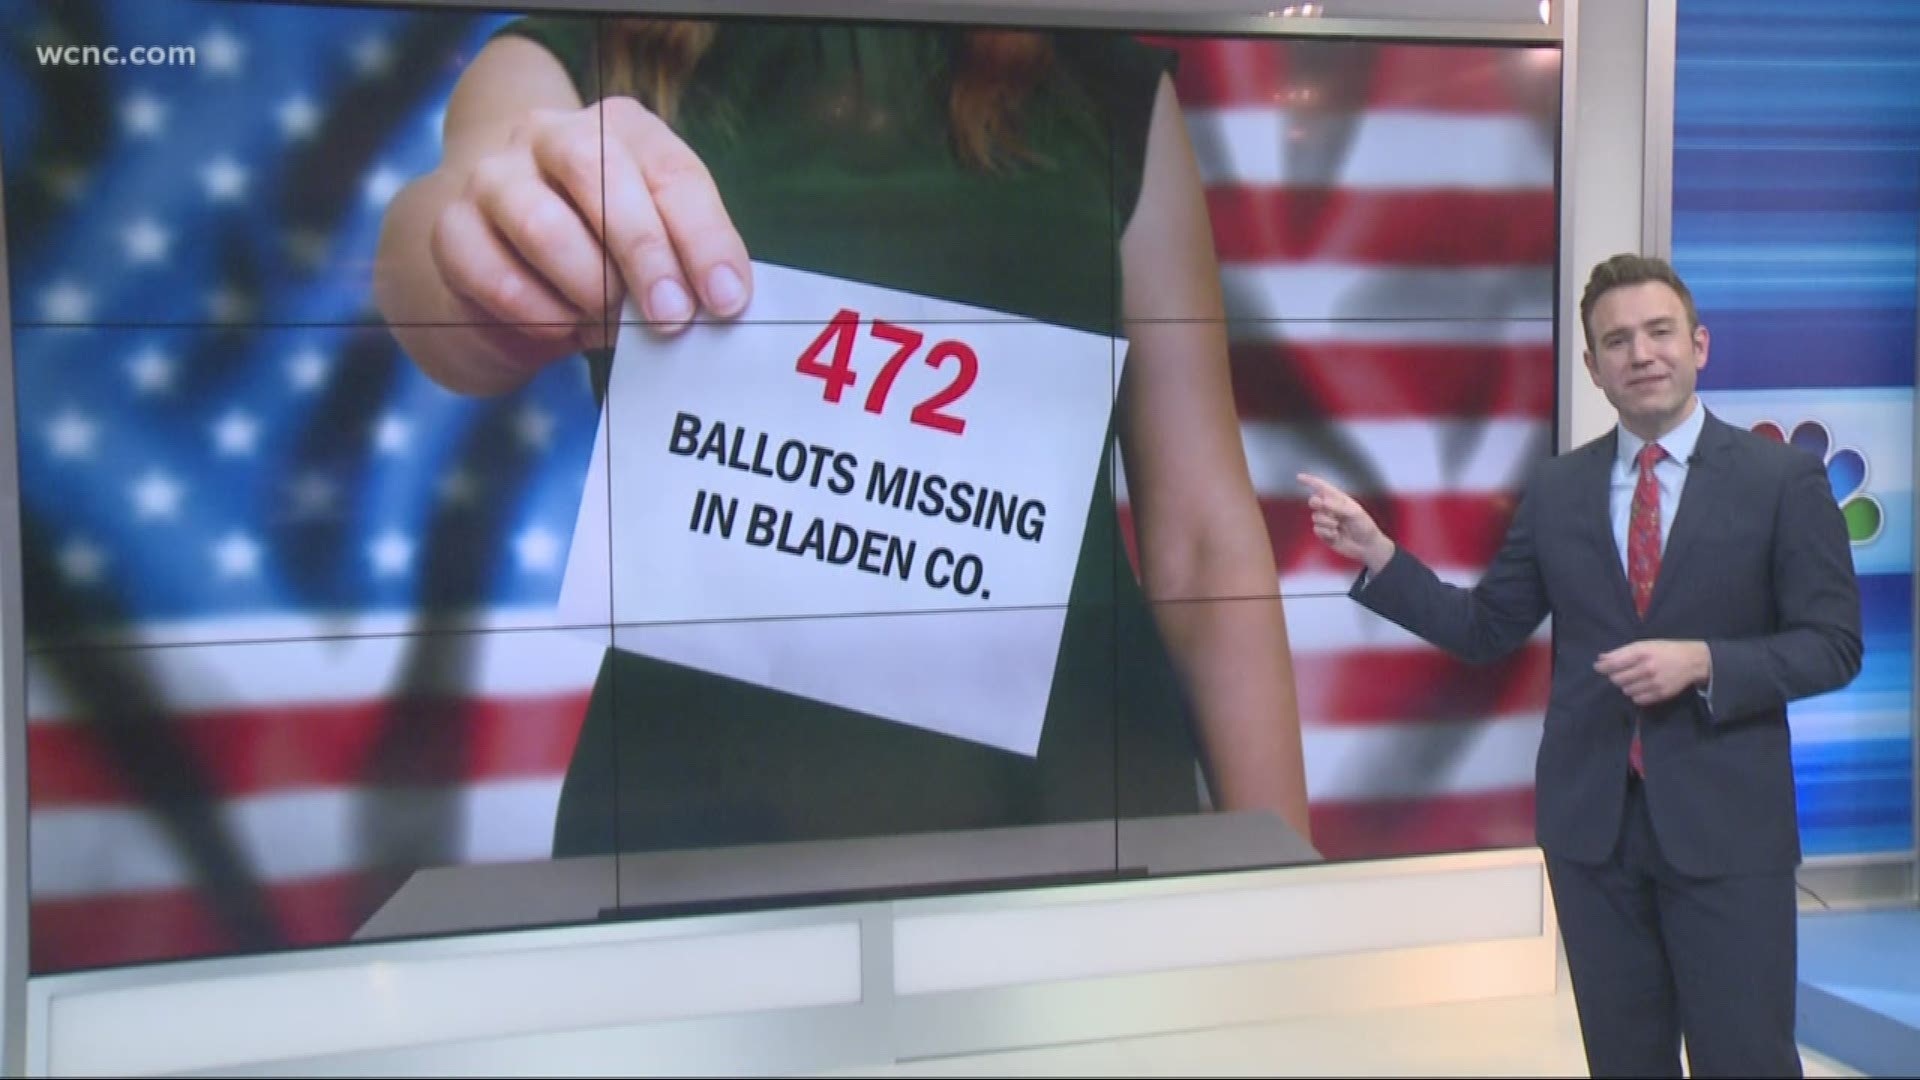 Many of the allegations involved in the District 9 election investigation came to light when absentee ballots were requested but never turned in.